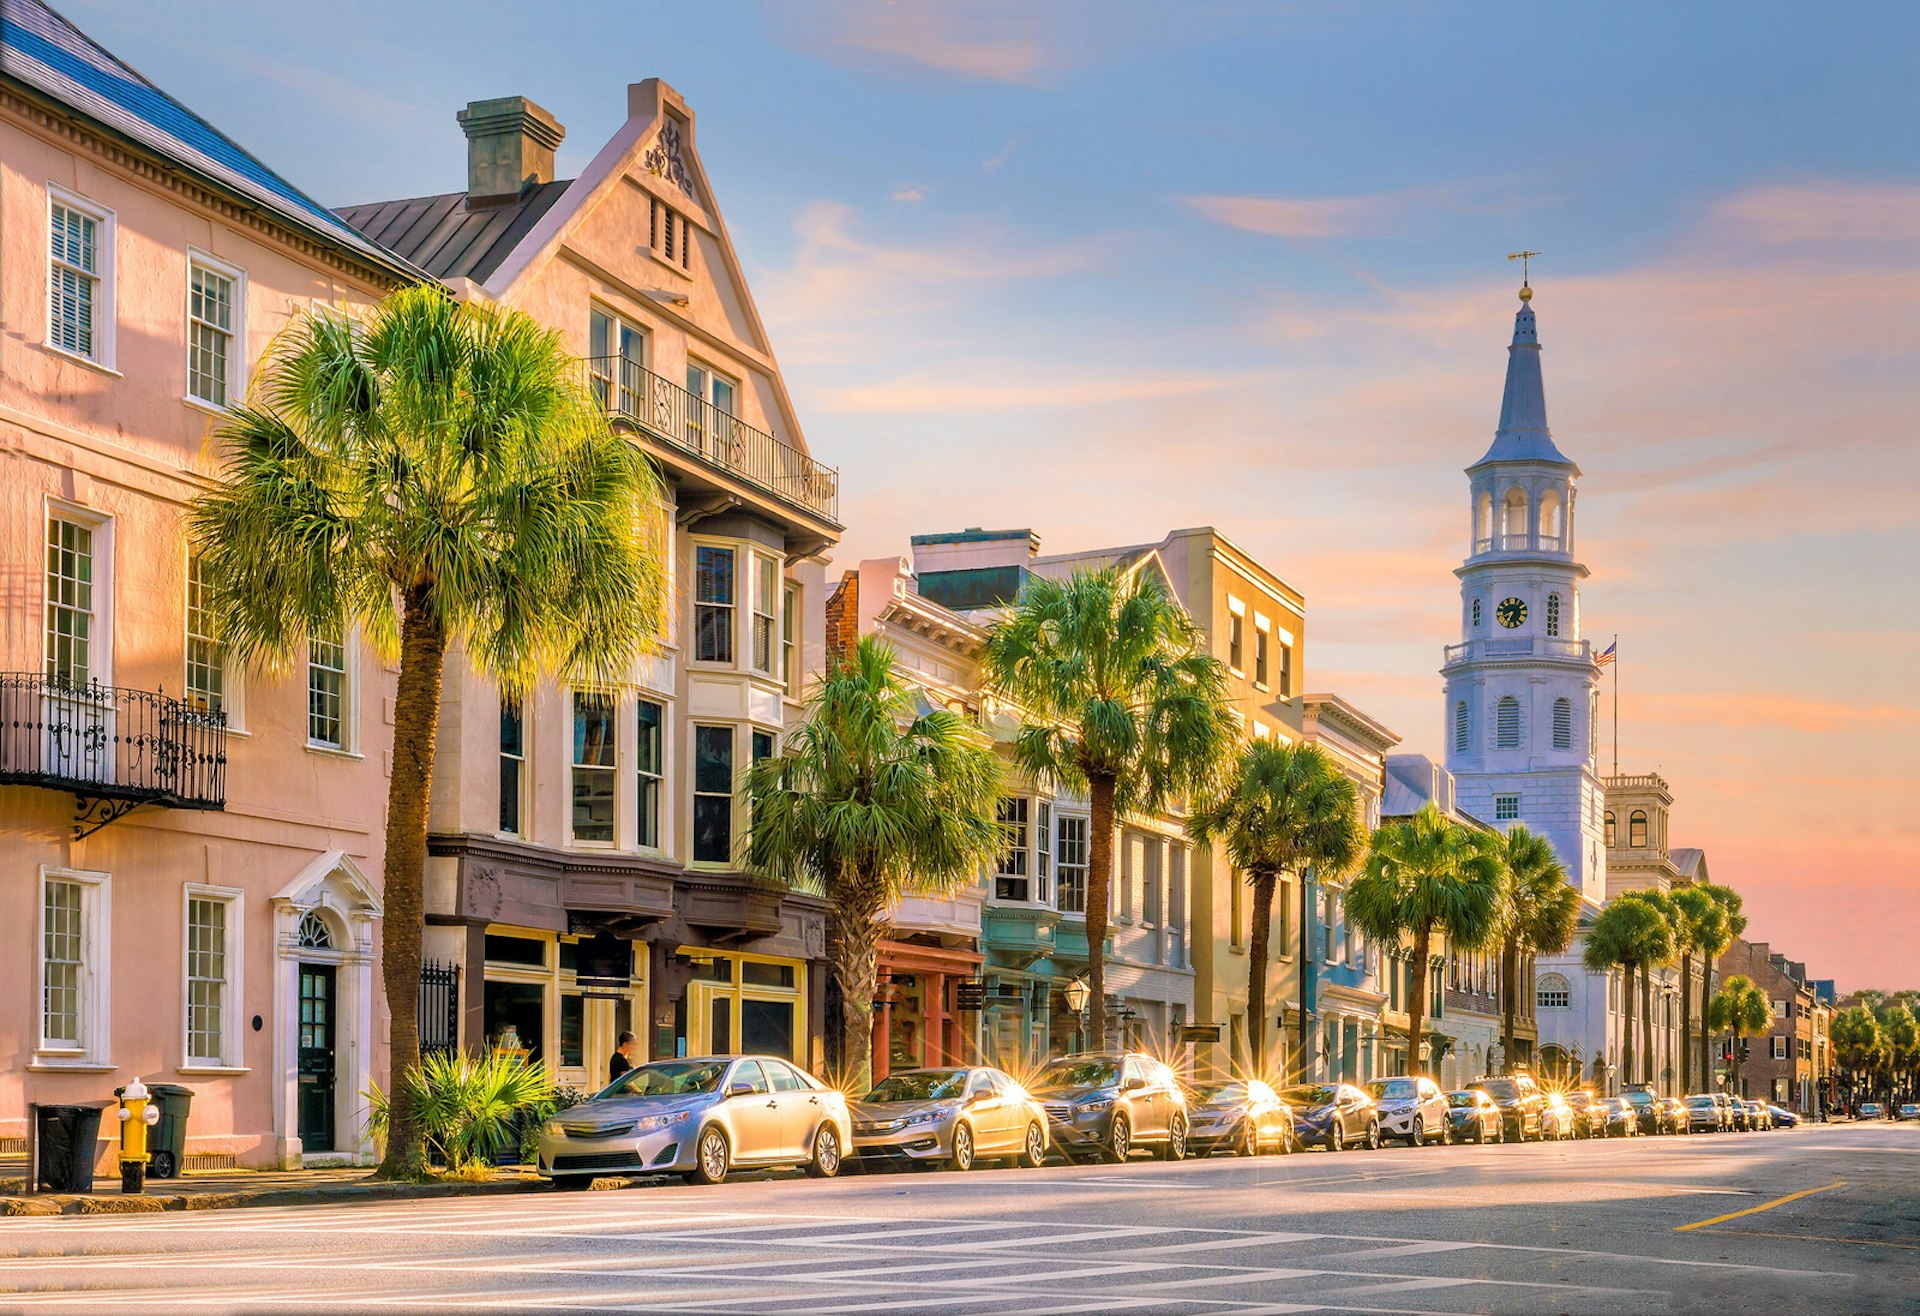 Cars parked on a street with historic architecture in downtown Charleston, South Carolina